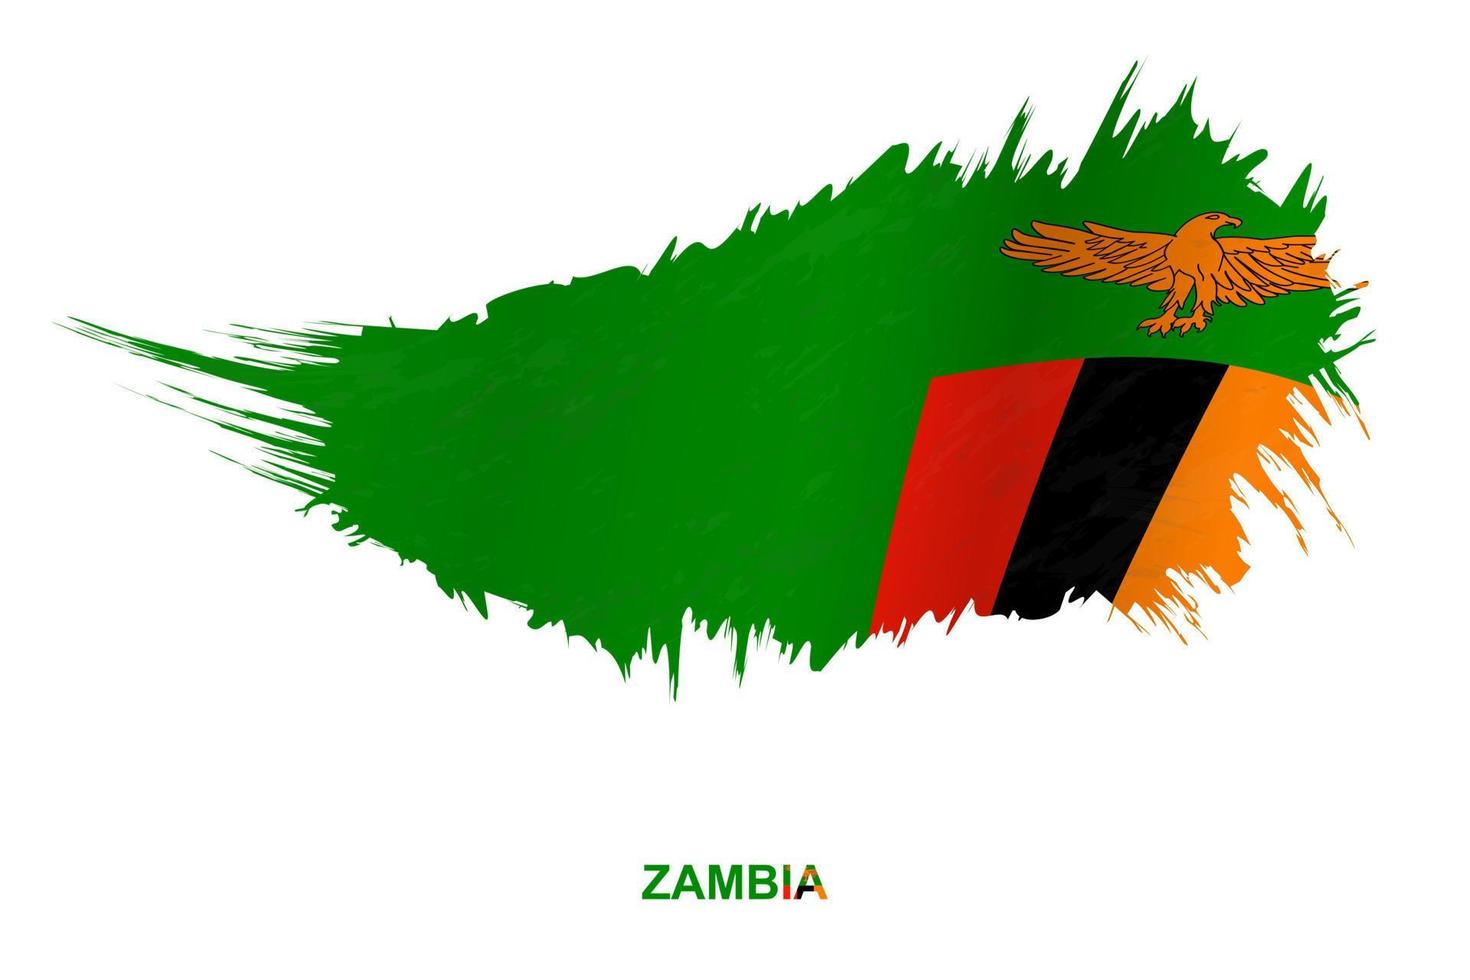 Flag of Zambia in grunge style with waving effect. vector